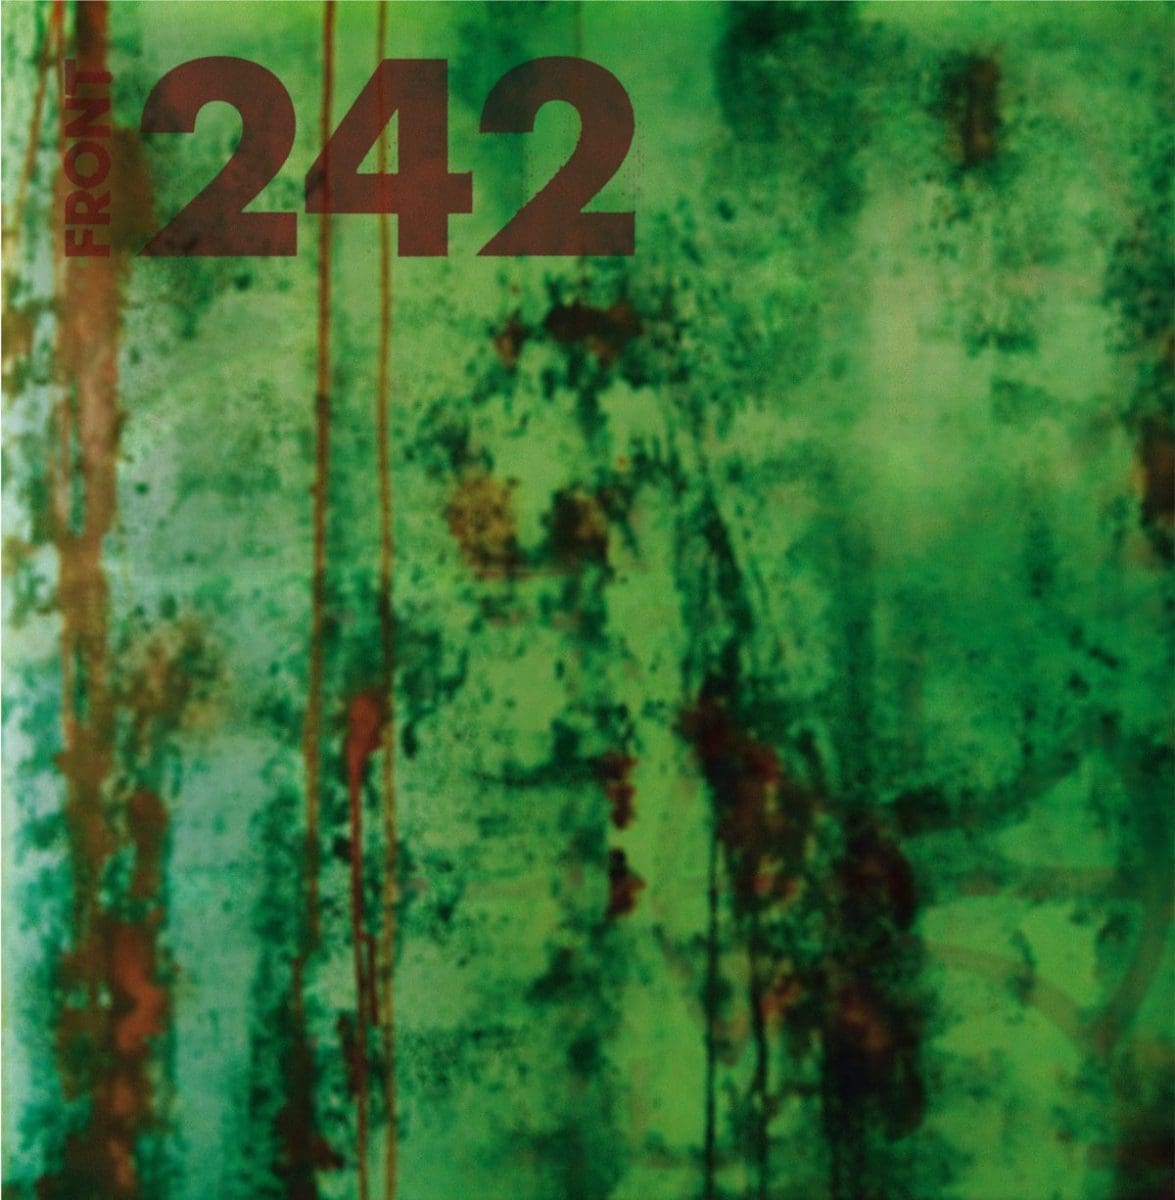 Front 242 releases two '91 live recordings (live in the EU and USA) + new Daniel B. album